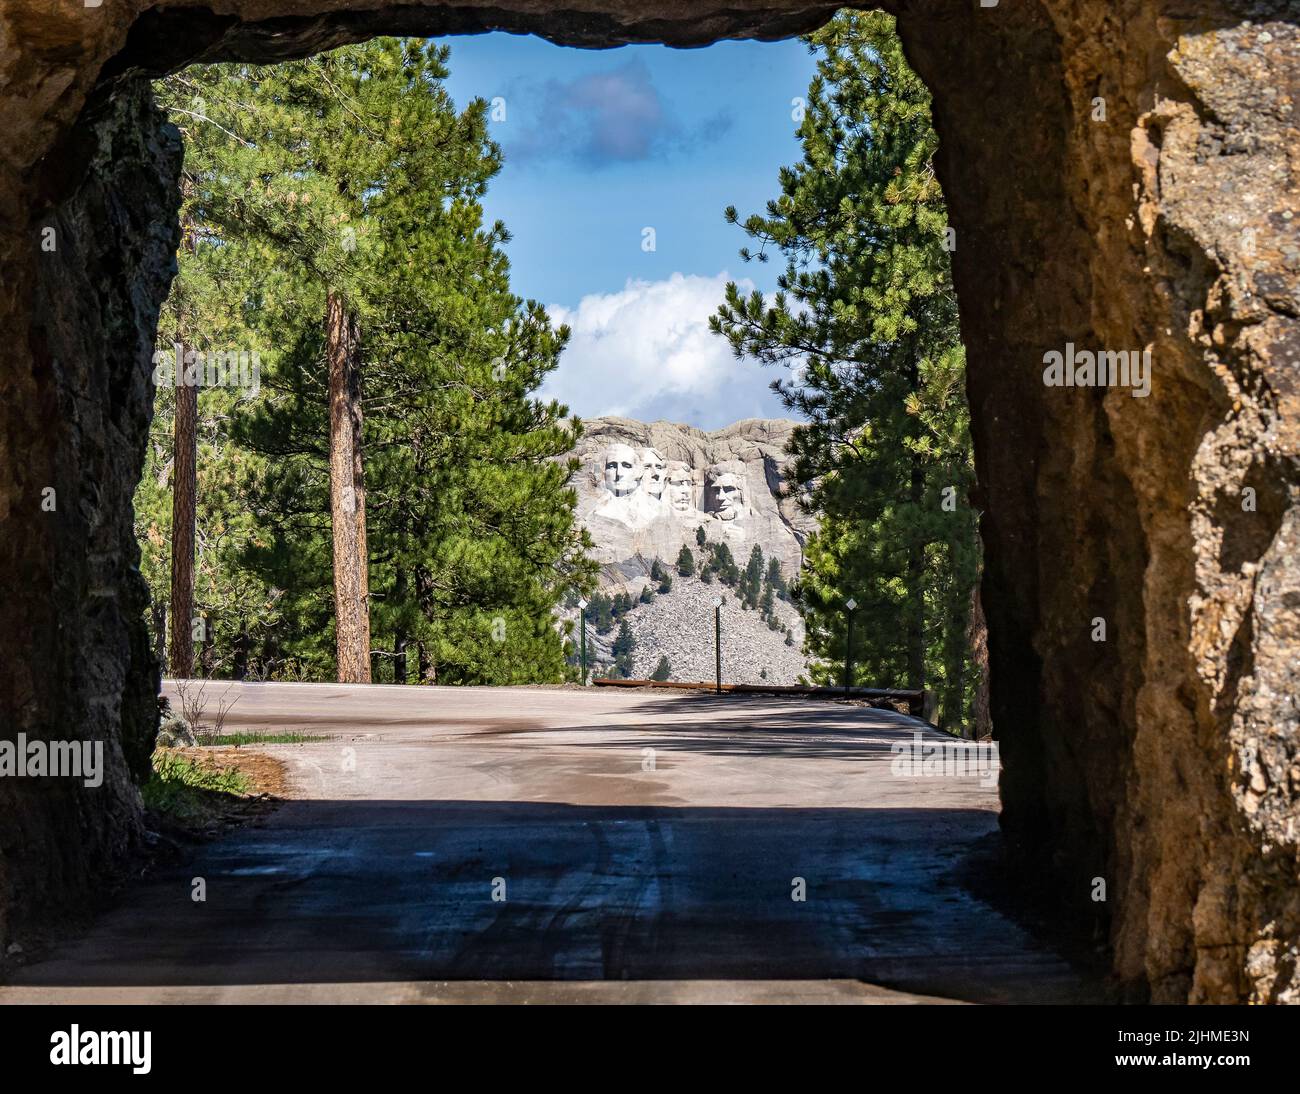 Mount Rushmore National Memorial though the Scovel Johnson Tunnel on Iron MountaIn Road part of the Peter Norbeck National Scenic Byway in the Black H Stock Photo